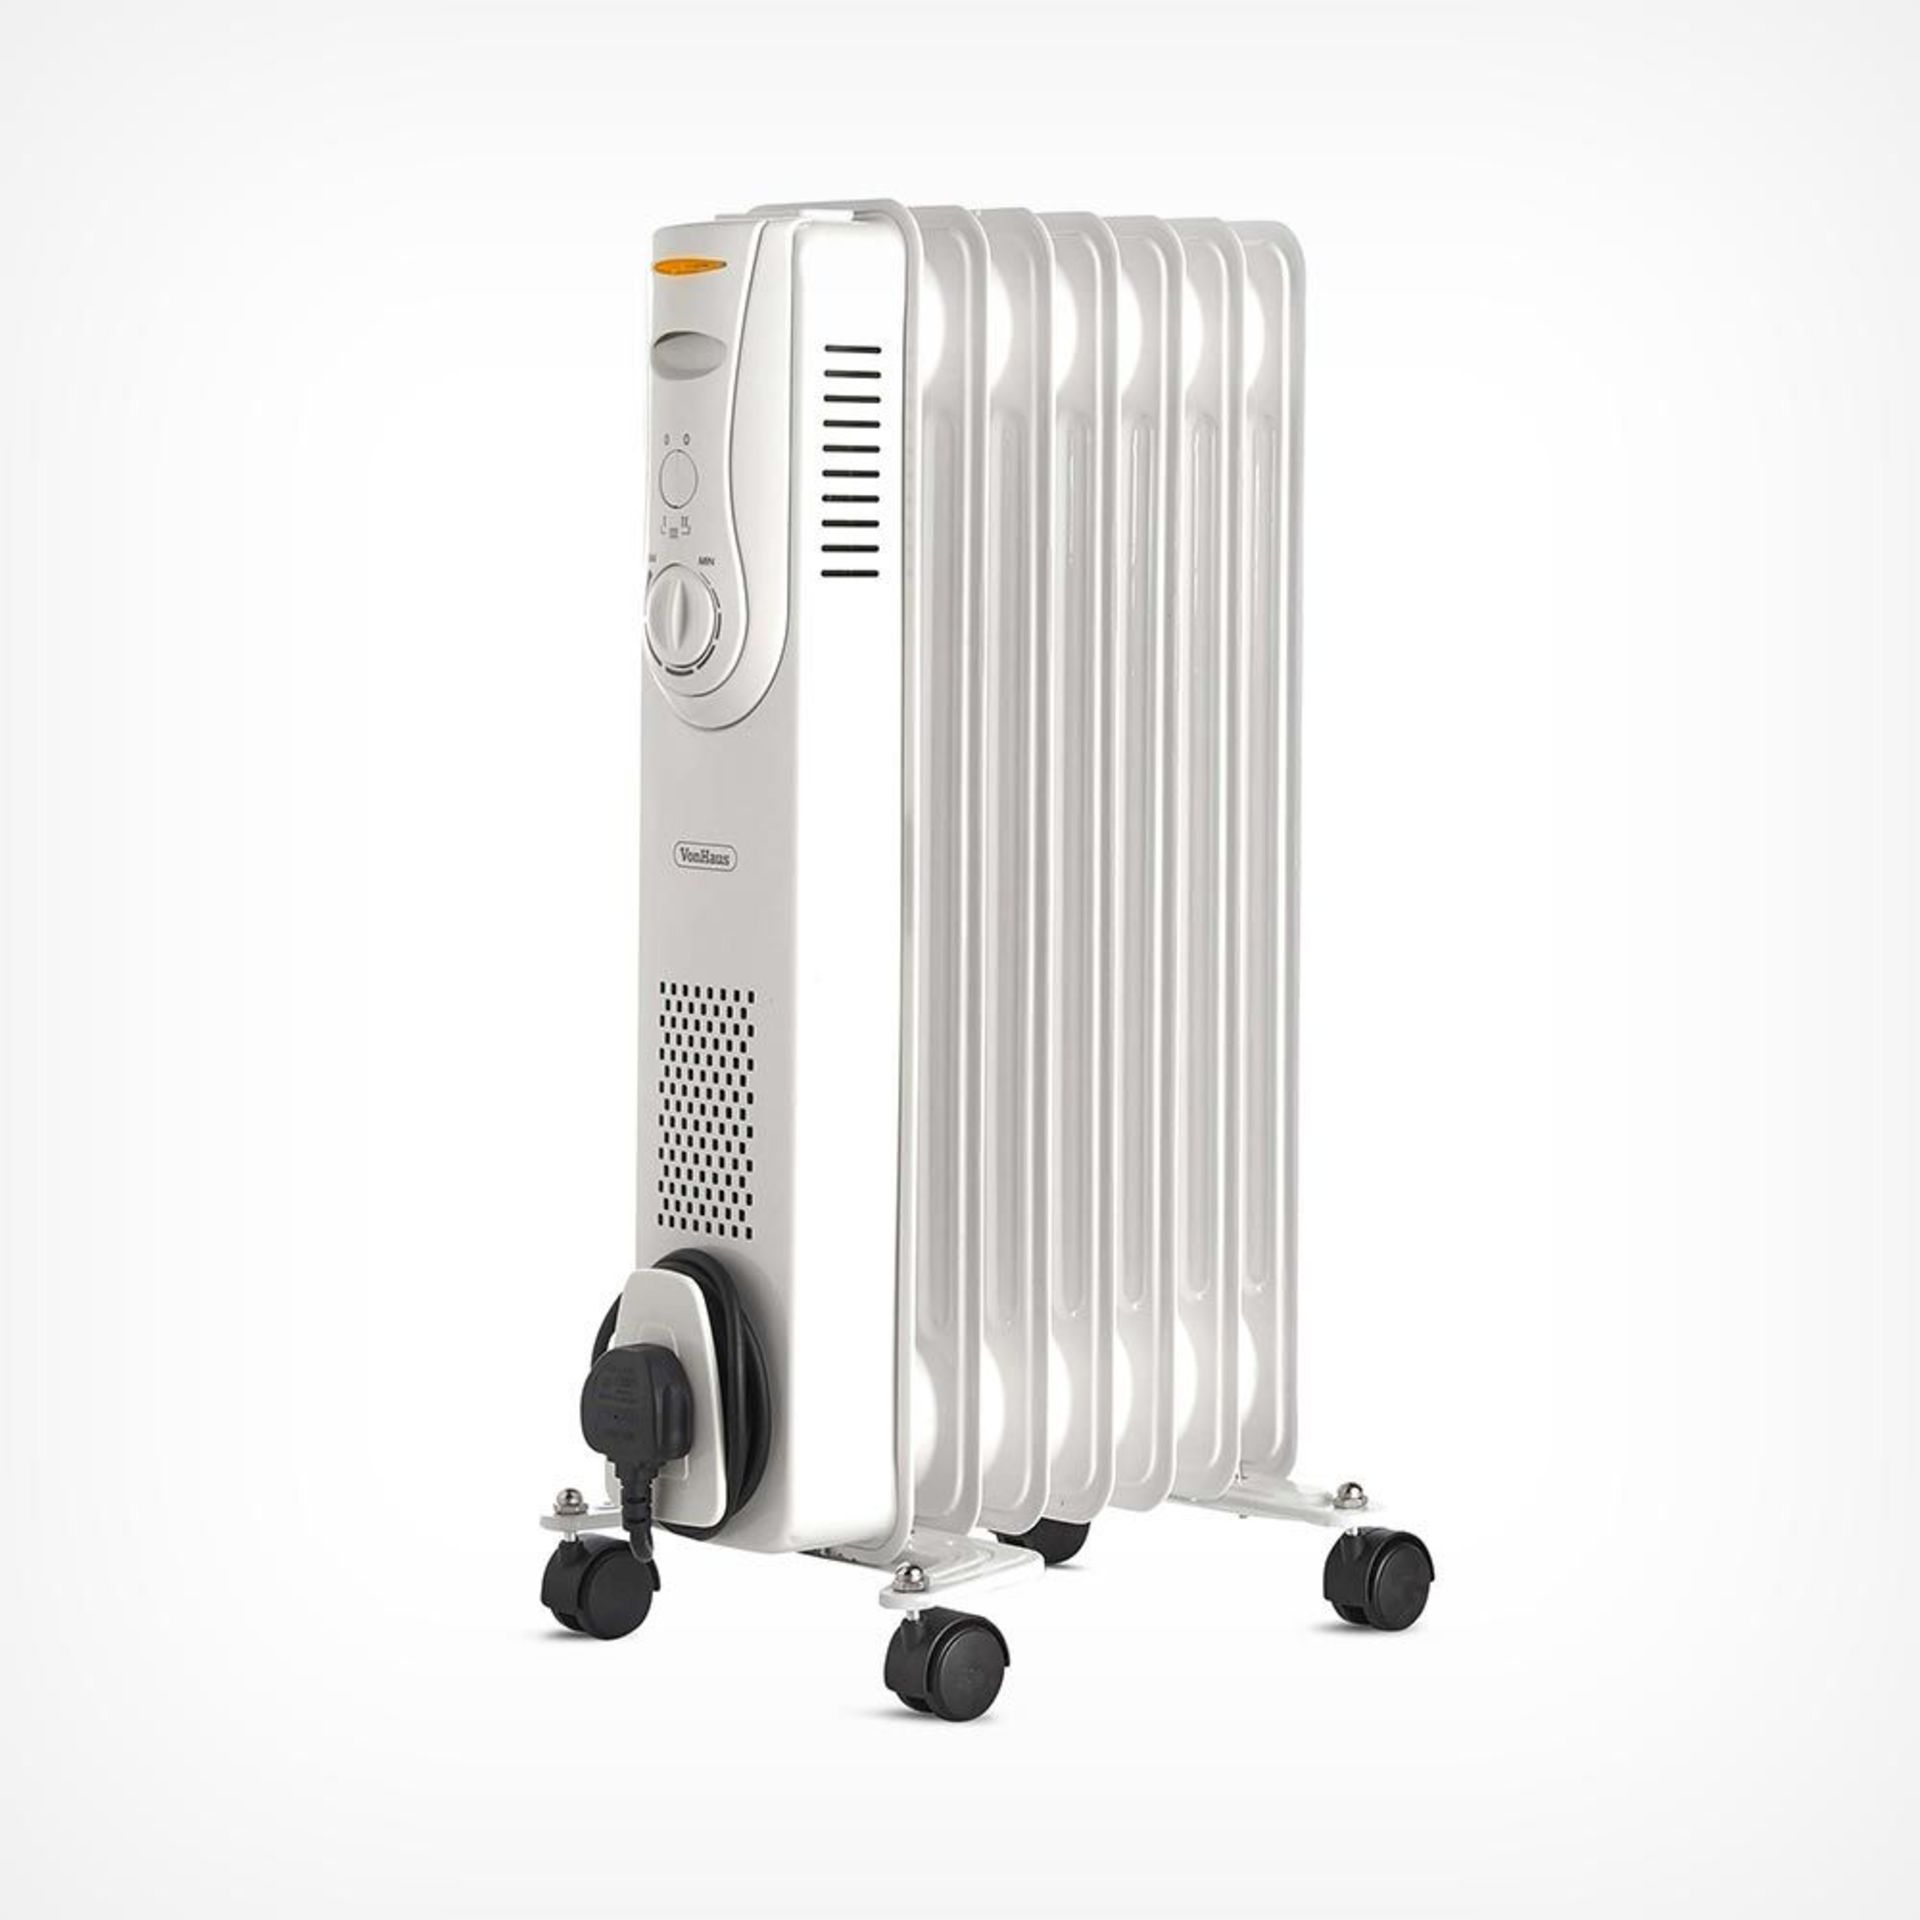 (CP98) 7 Fin 1500W Oil Filled Radiator - White Powerful 1500W radiator with 7 oil-filled fins ... - Image 2 of 4